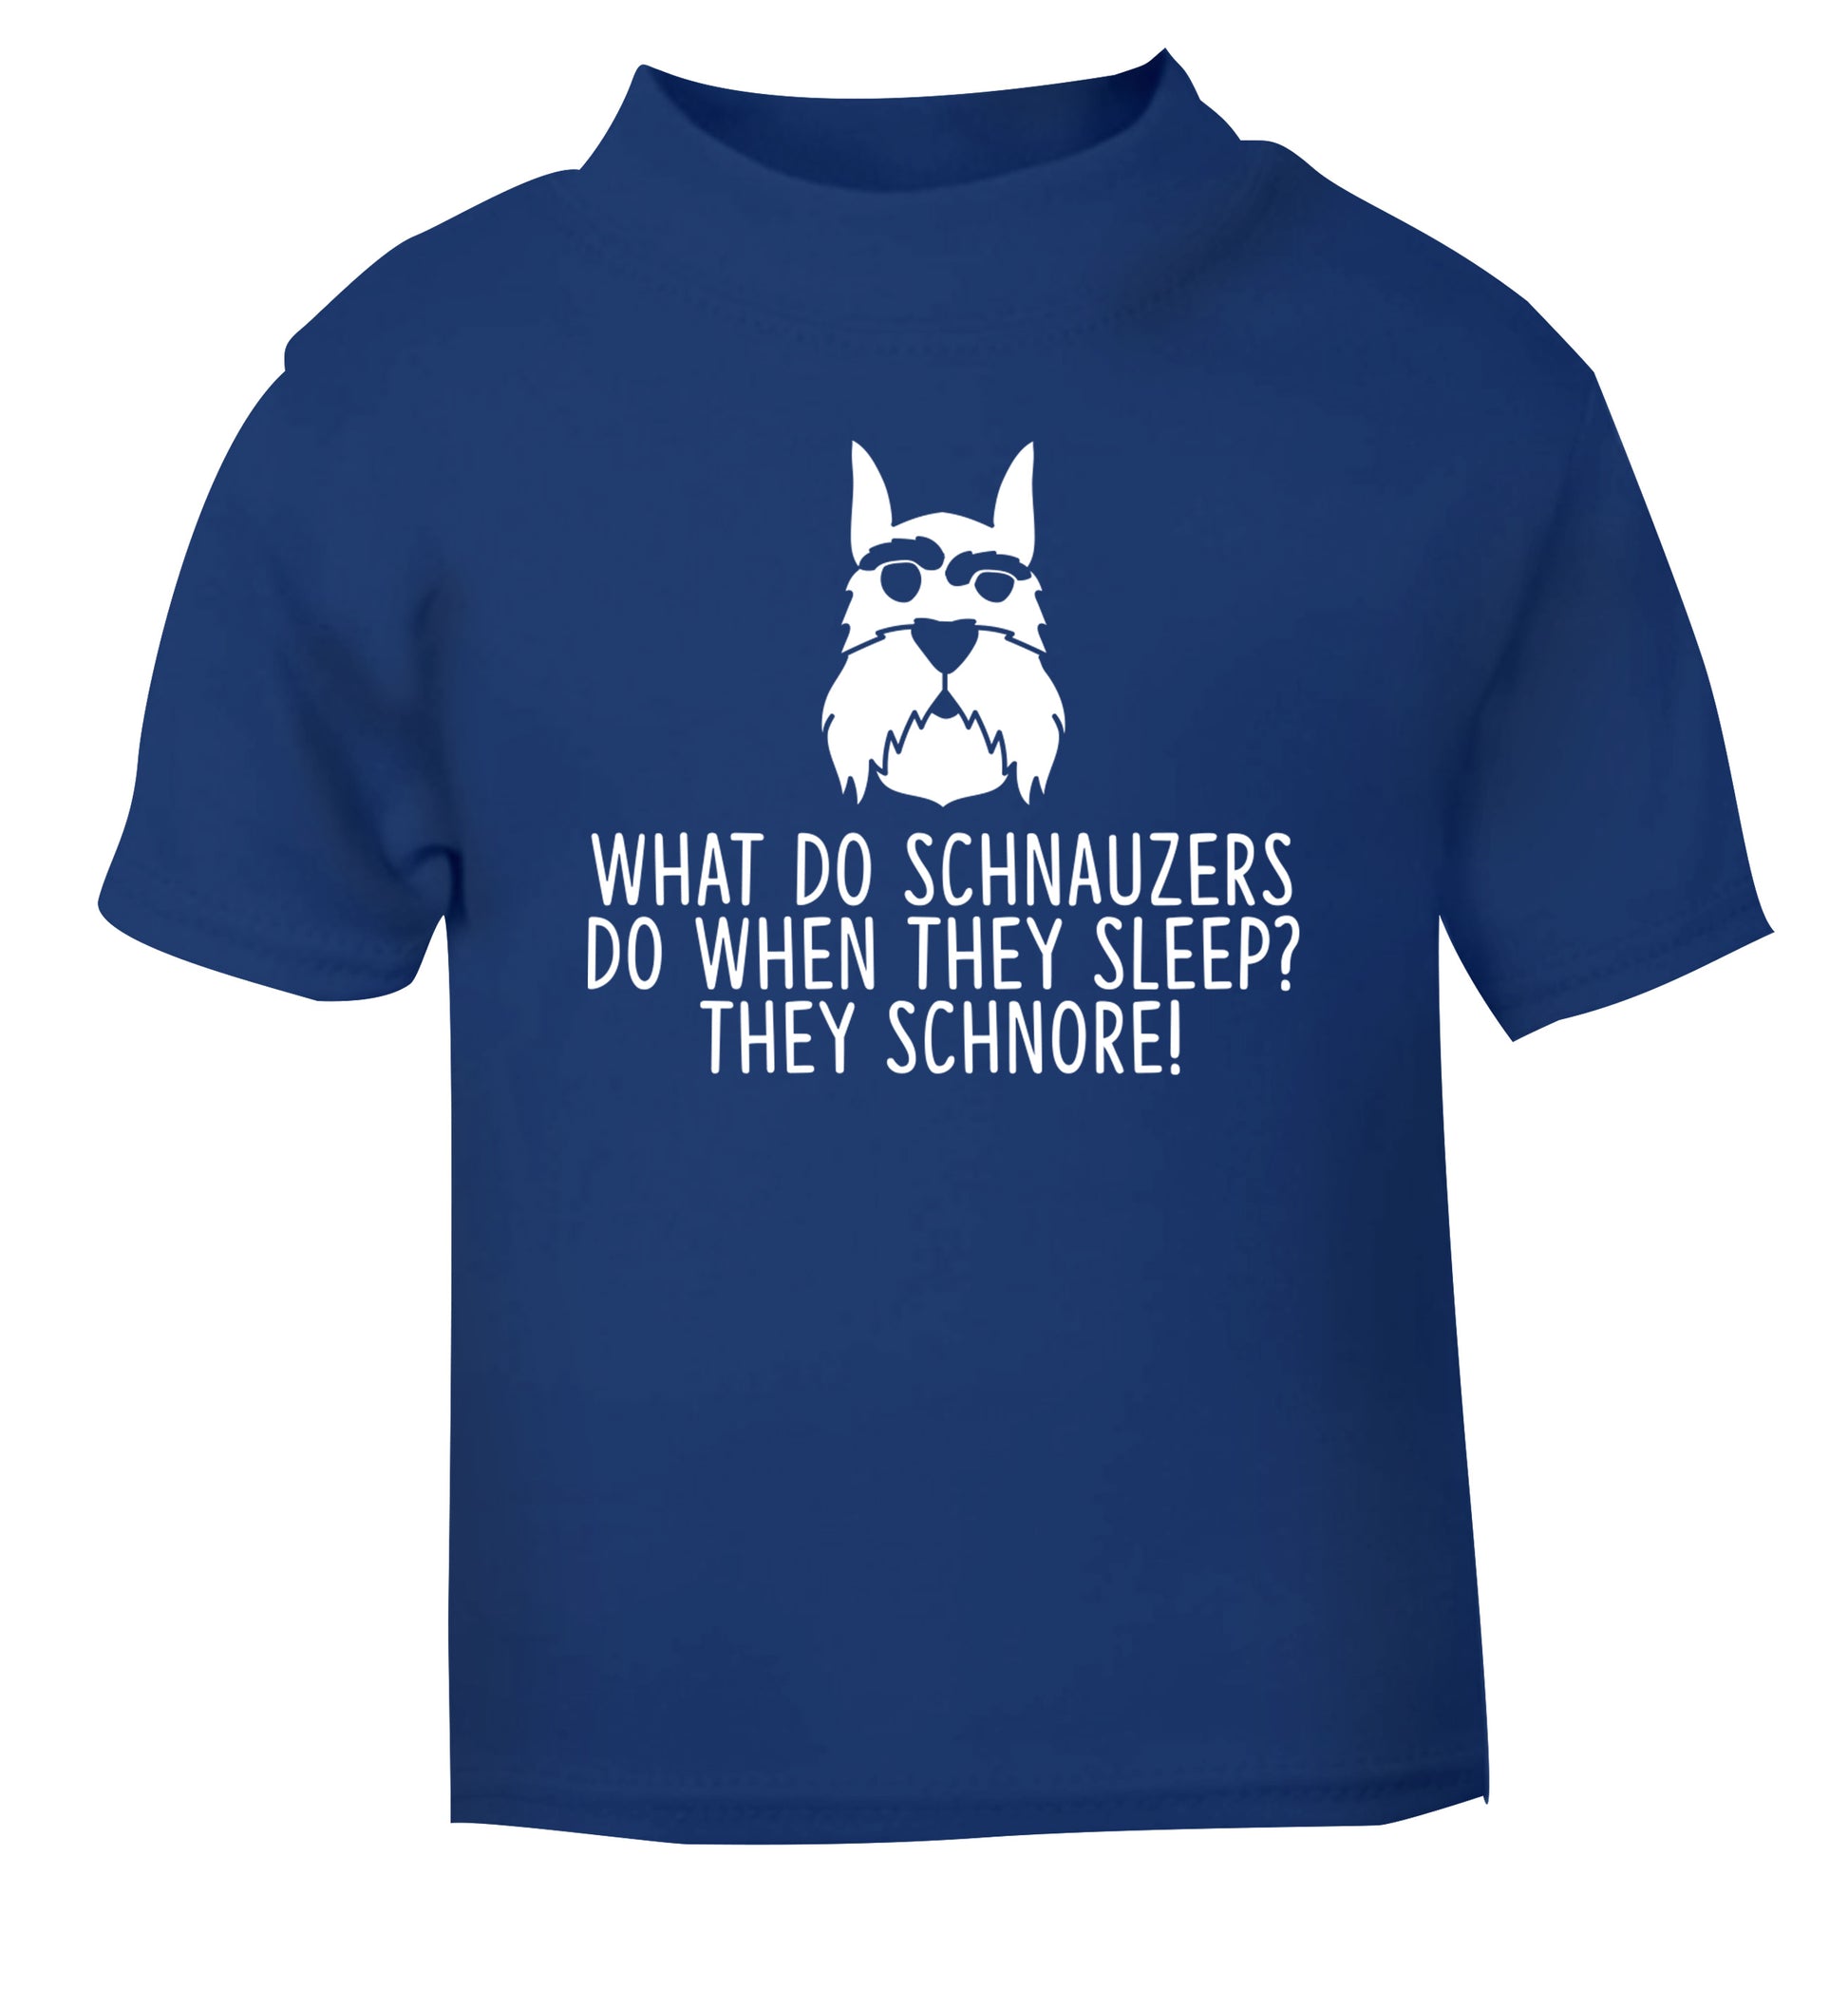 What do schnauzers do when they sleep? Schnore! blue Baby Toddler Tshirt 2 Years